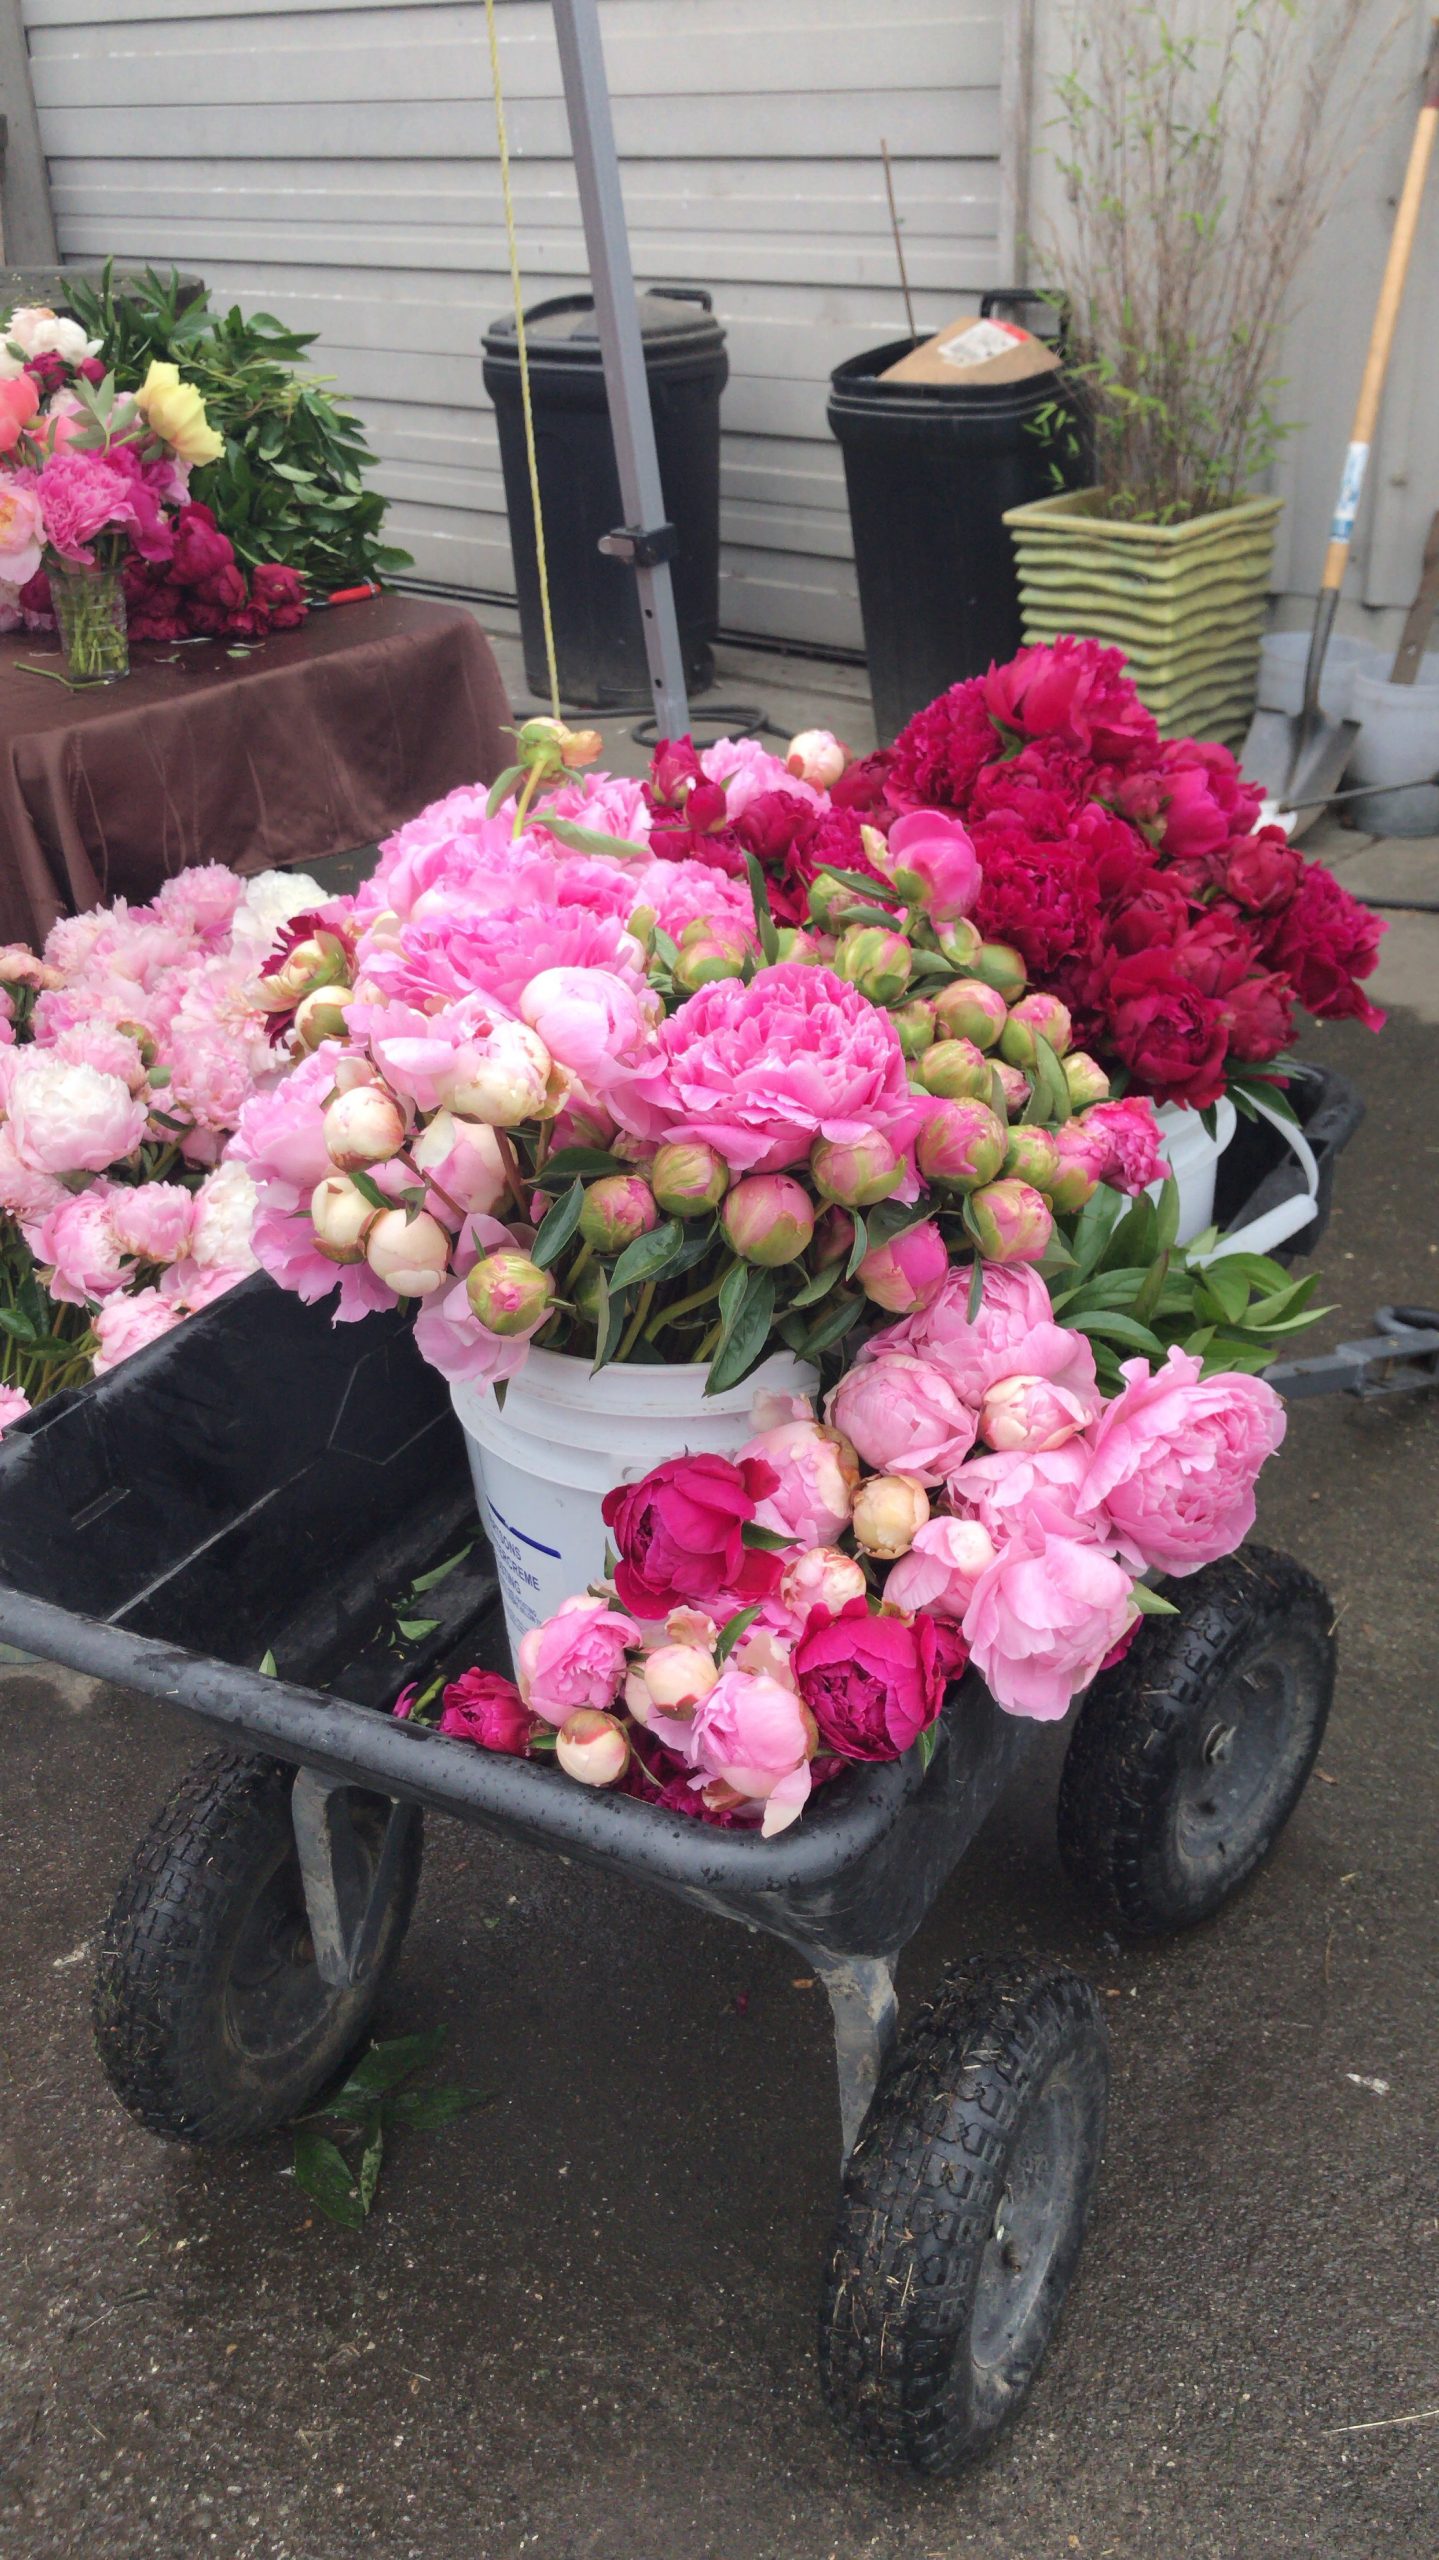 Styling Peonies Tips for Creating Beautiful Arrangement